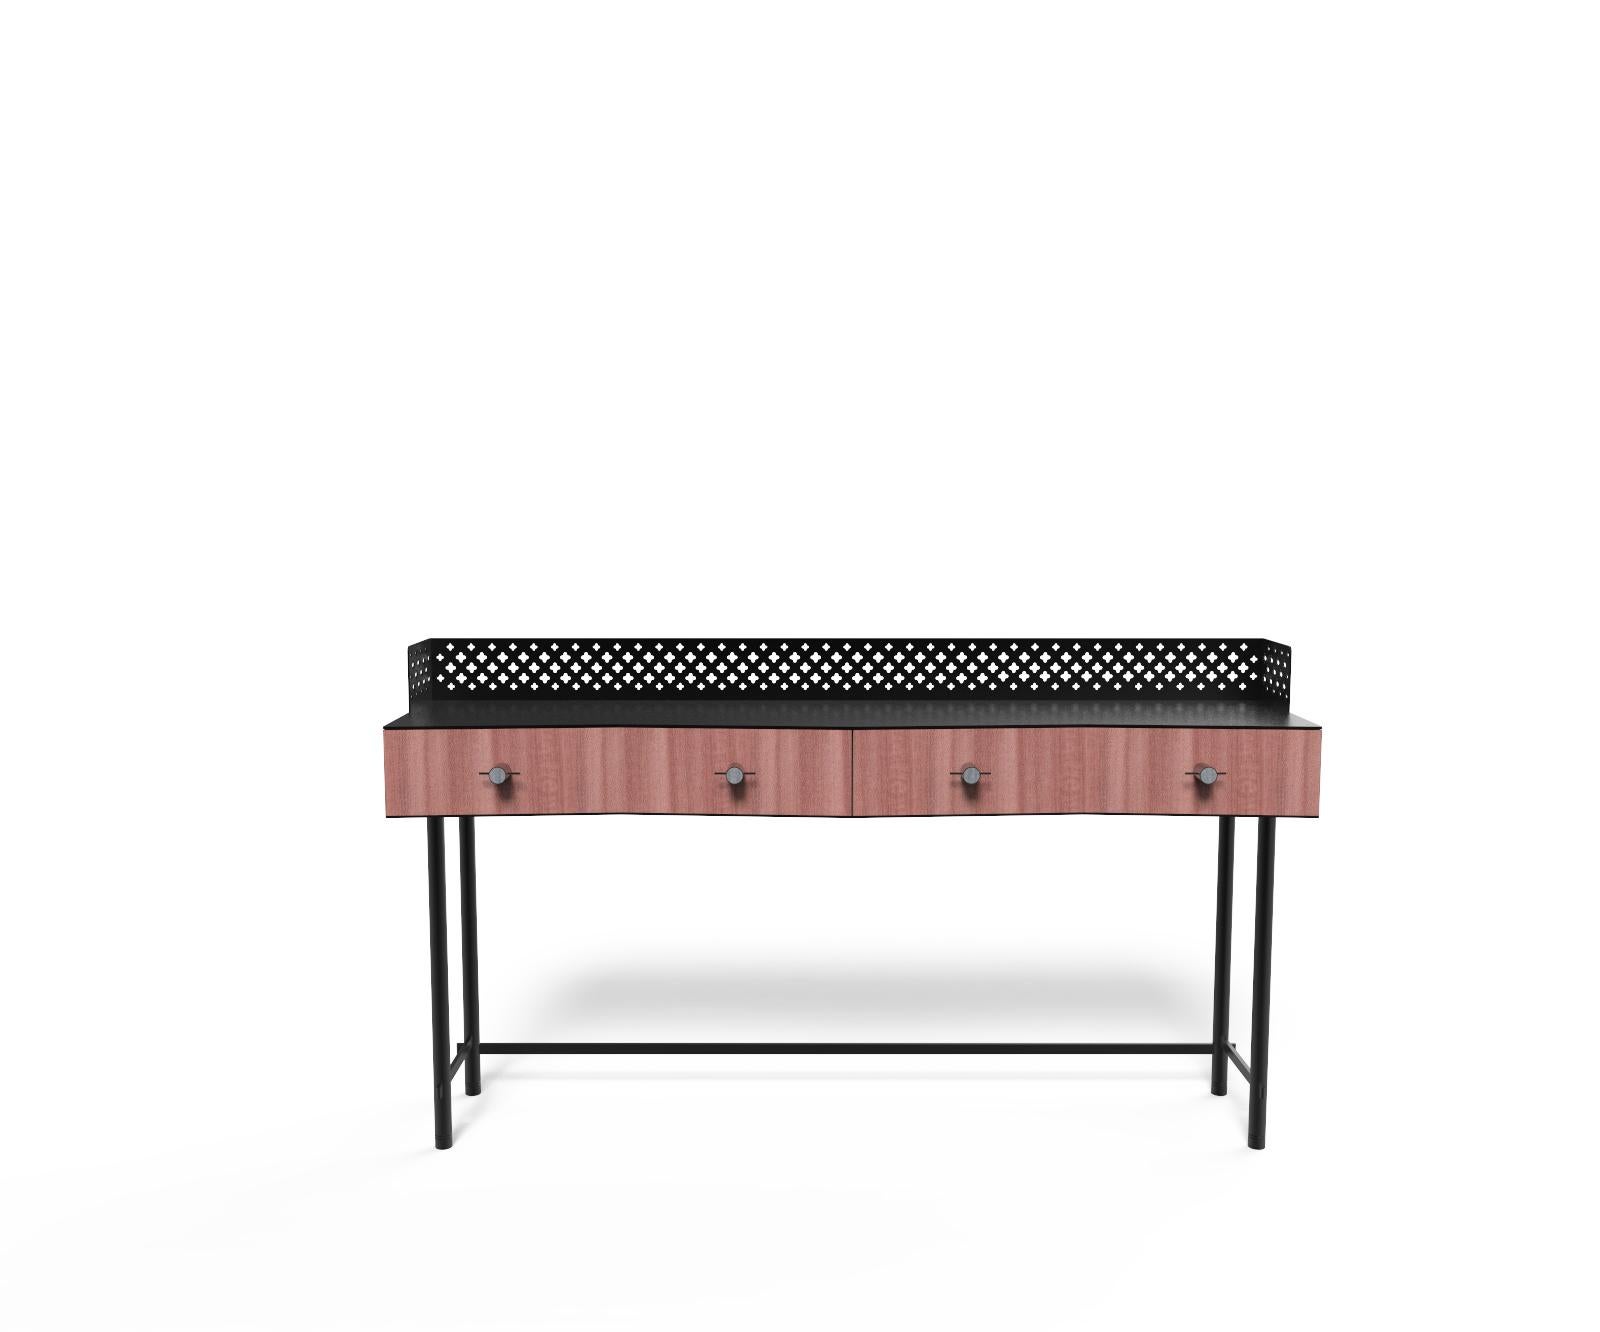 Savita Artisanal Luxury Wooden Console, Metal Structure, Made in Italy In New Condition For Sale In Milano, IT